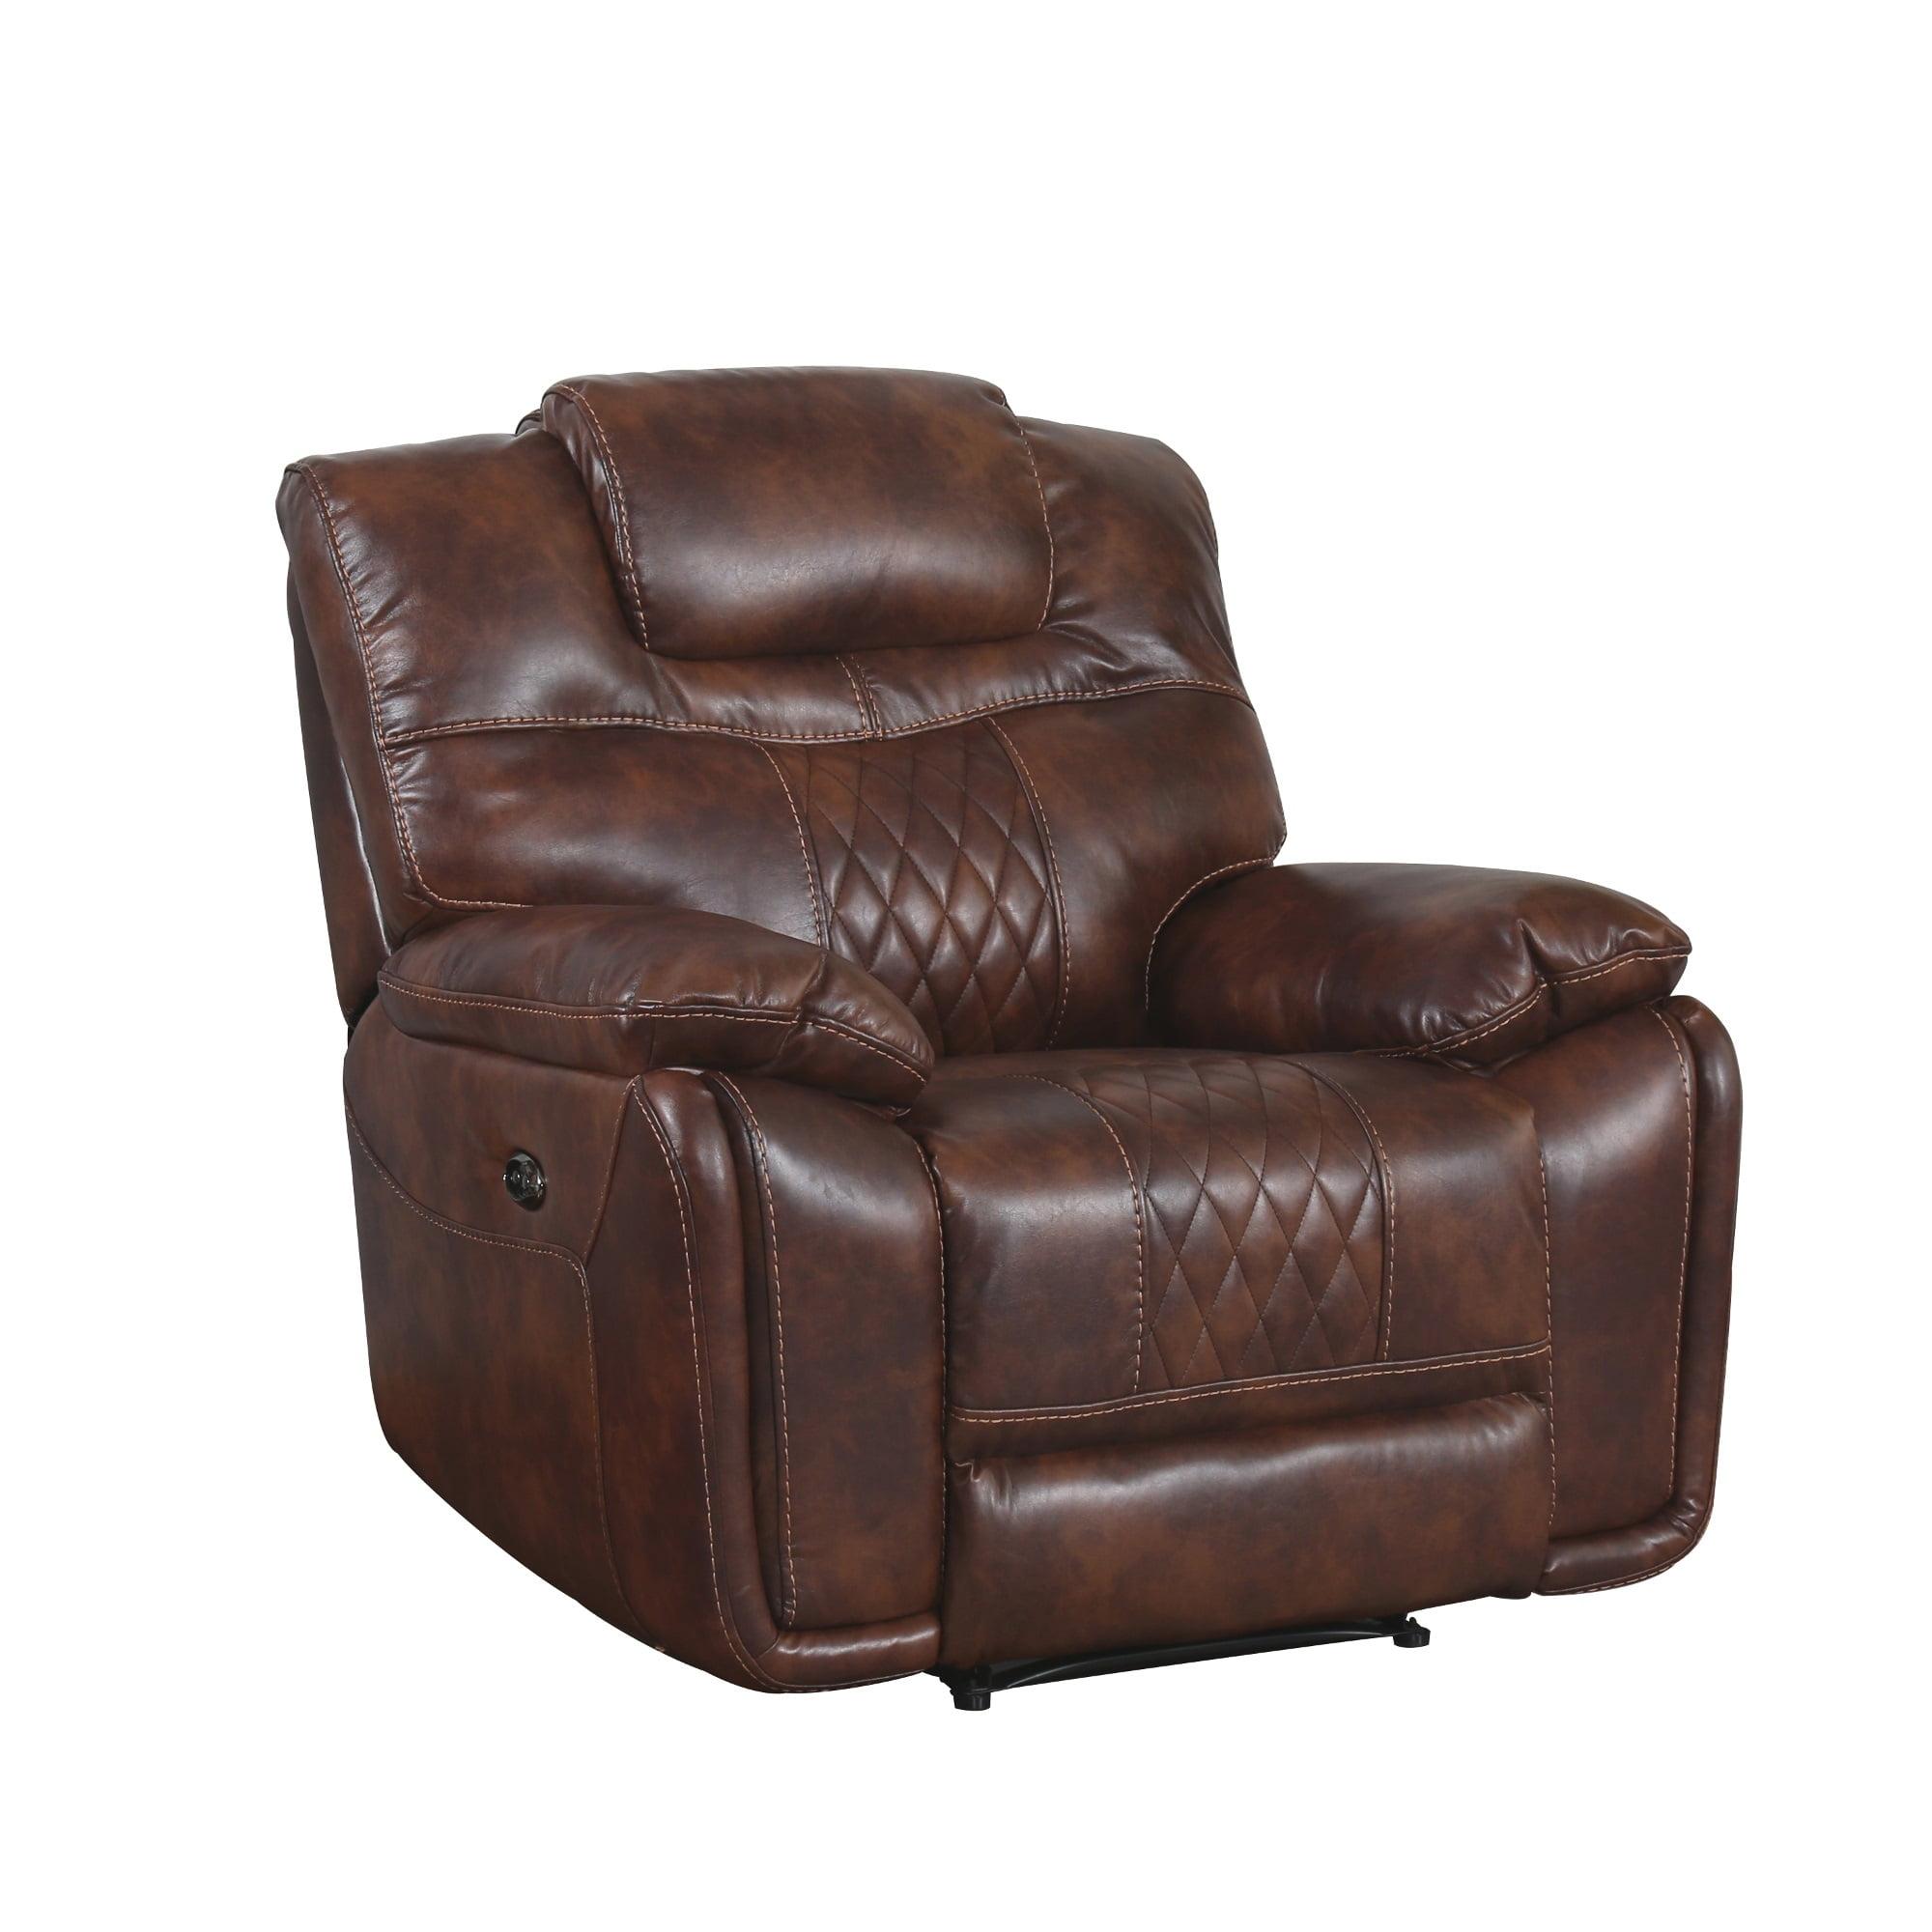 Traditional Brown Leather Recliner with Wood Frame and USB Port